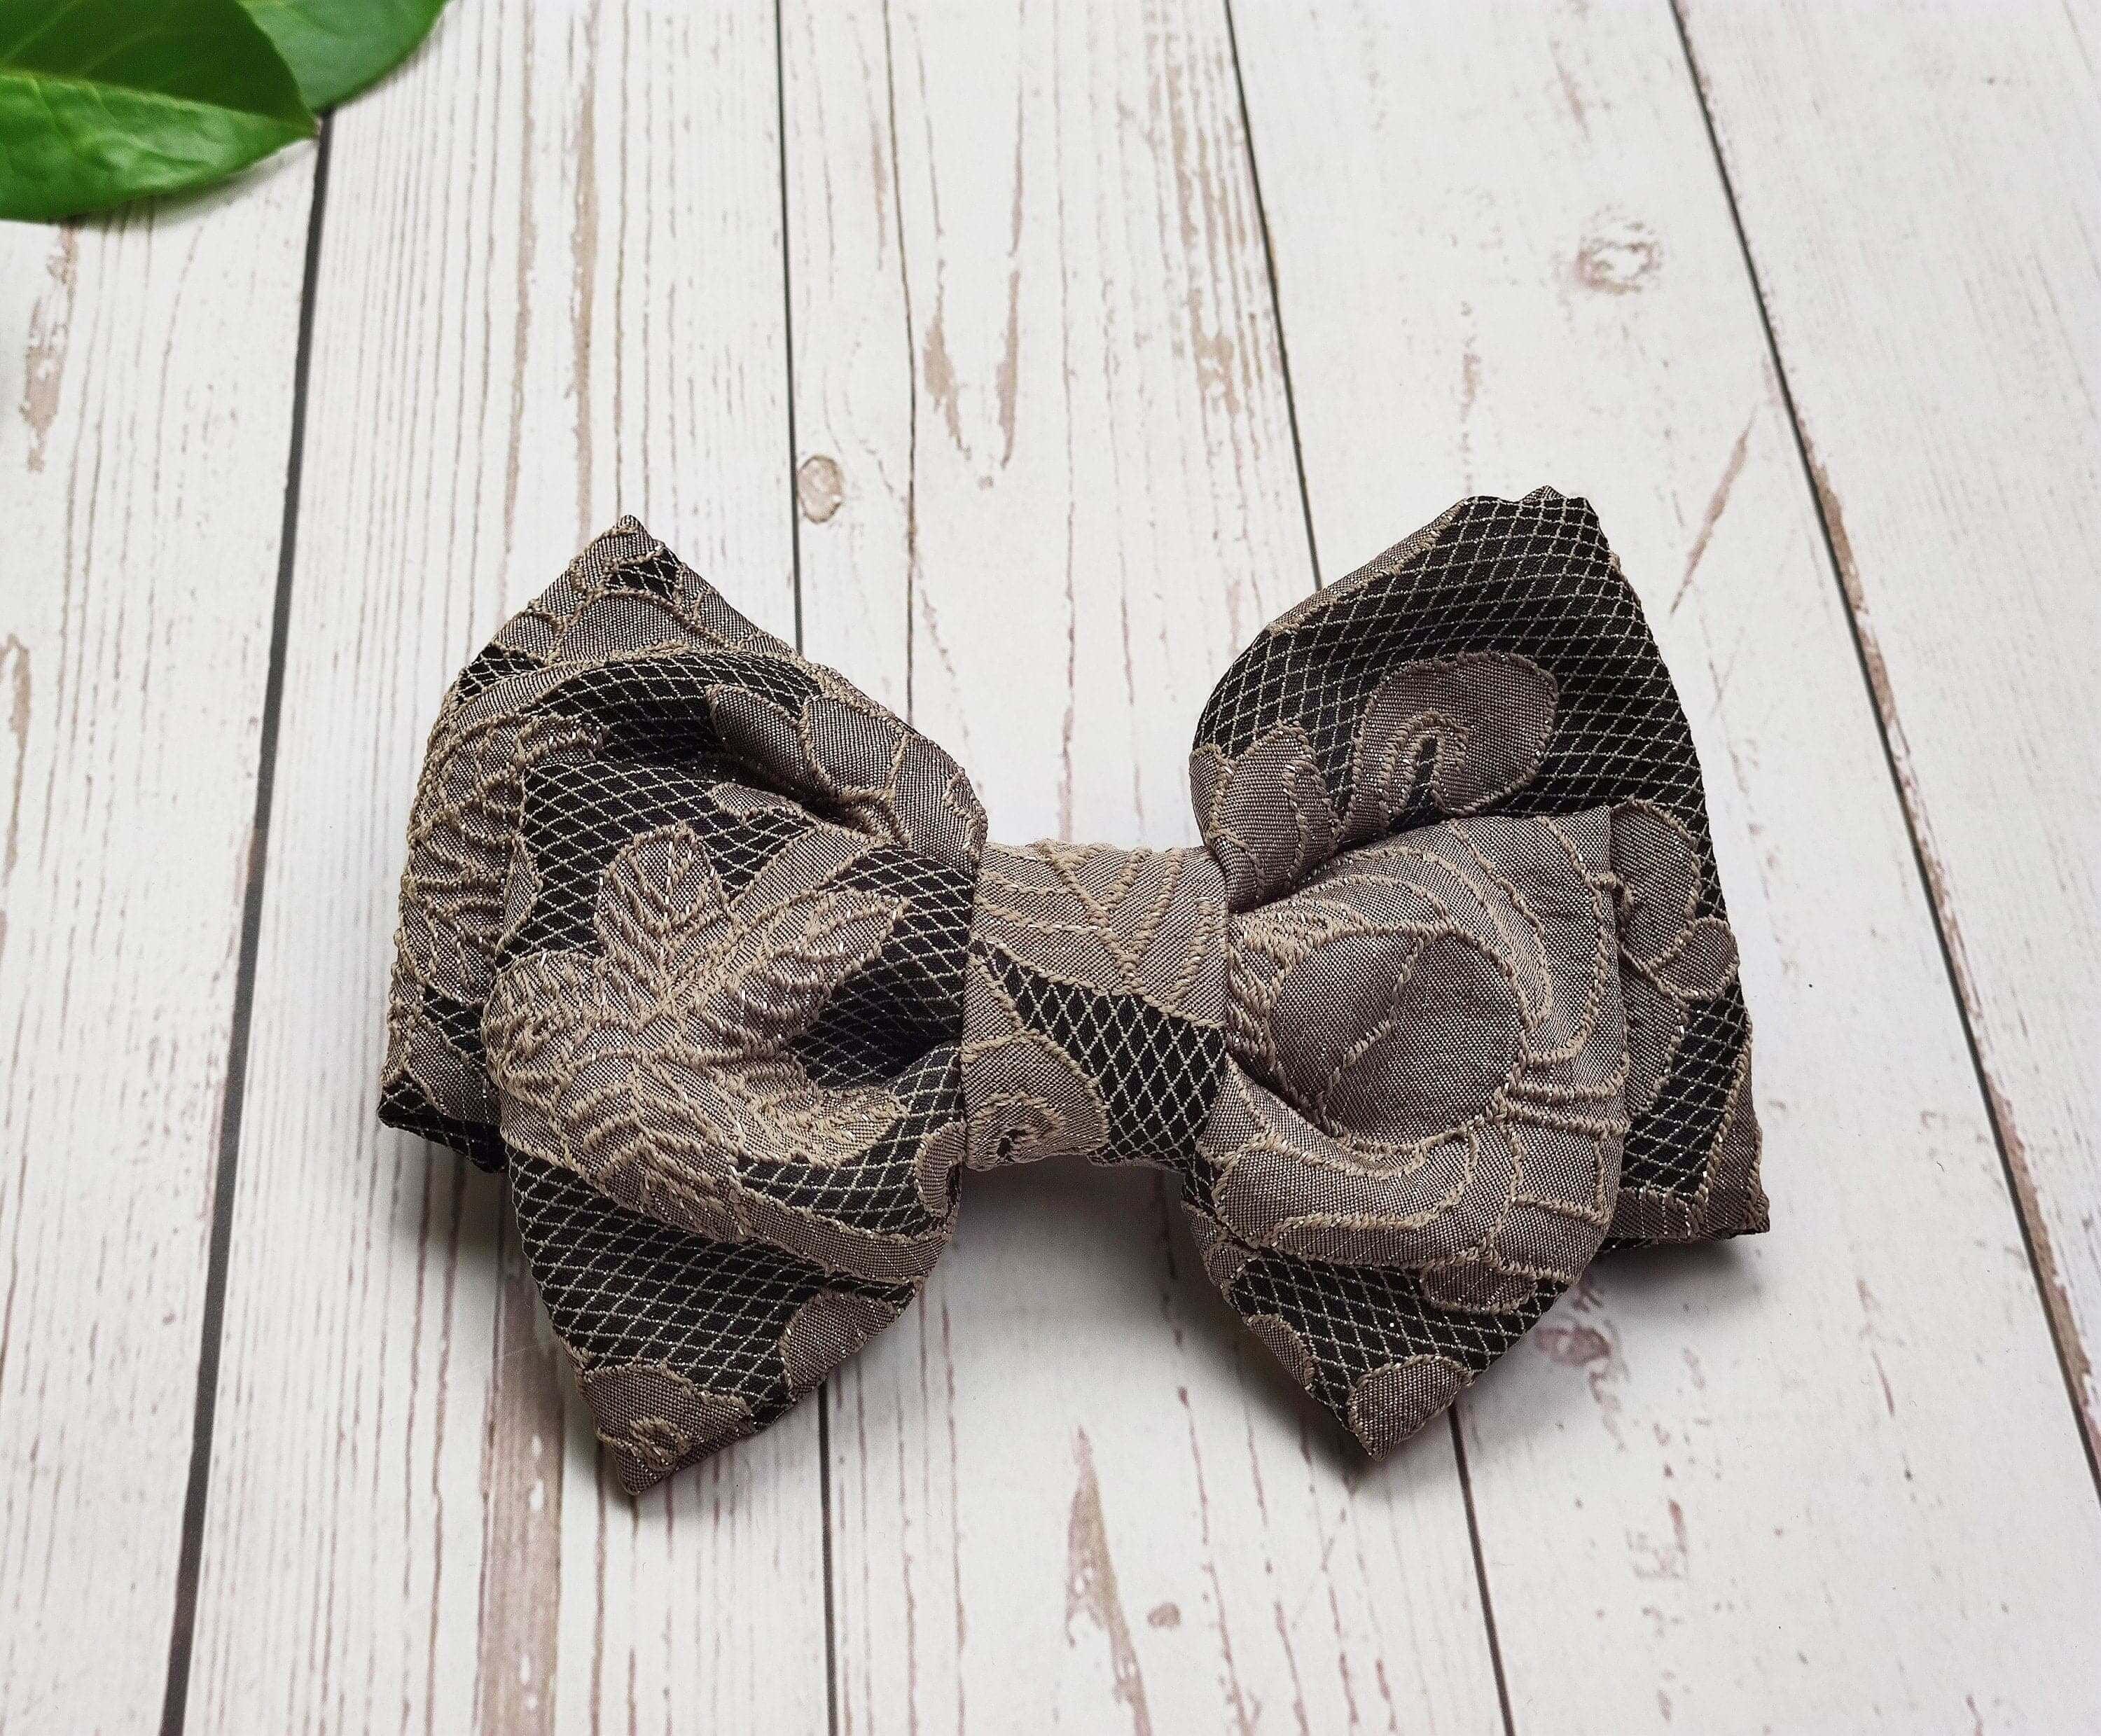 High-Quality Handmade Guipure Lace Hair Clips with Bow - Mink and Yellow Color Hairpin, Fashionable Hair Accessory and Hair Bow Clasp available at Moyoni Design